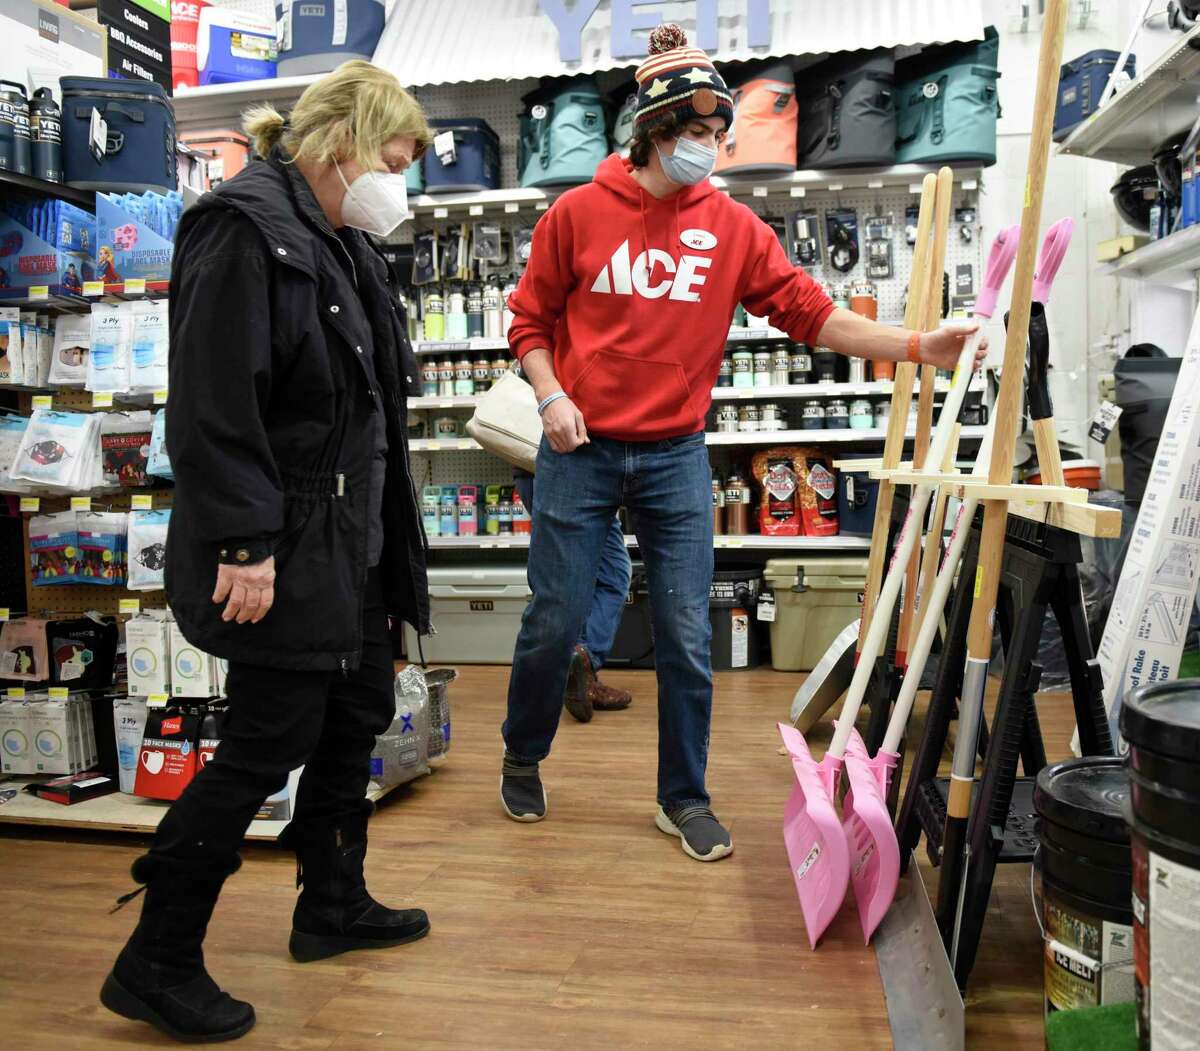 Store associate Chris Cosenza helps Old Greenwich resident Julie Tulipane pick out a shovel at Feinsod Ace Hardware in Old Greenwich, Conn. Wednesday, Dec. 16, 2020. Folks stocked up on shovels, ice melt, and groceries in anticipation of the winter storm expected to dump more than a foot of snow starting Wednesday night.